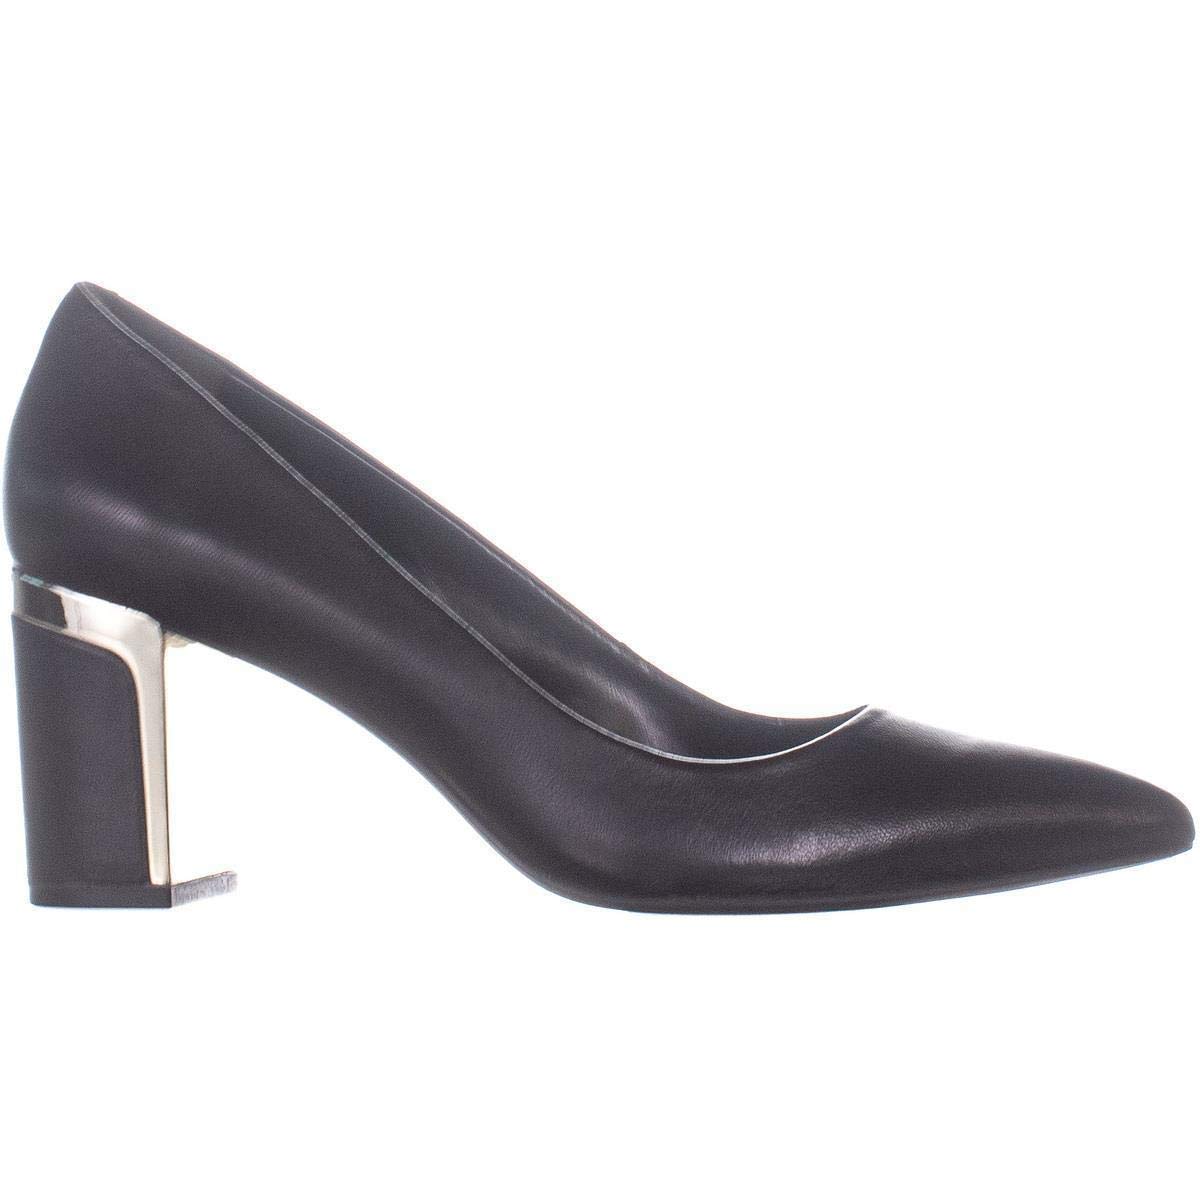 DKNY Womens Elie Leather Pointed Toe Classic Pumps, Black, Size 7.0 ...